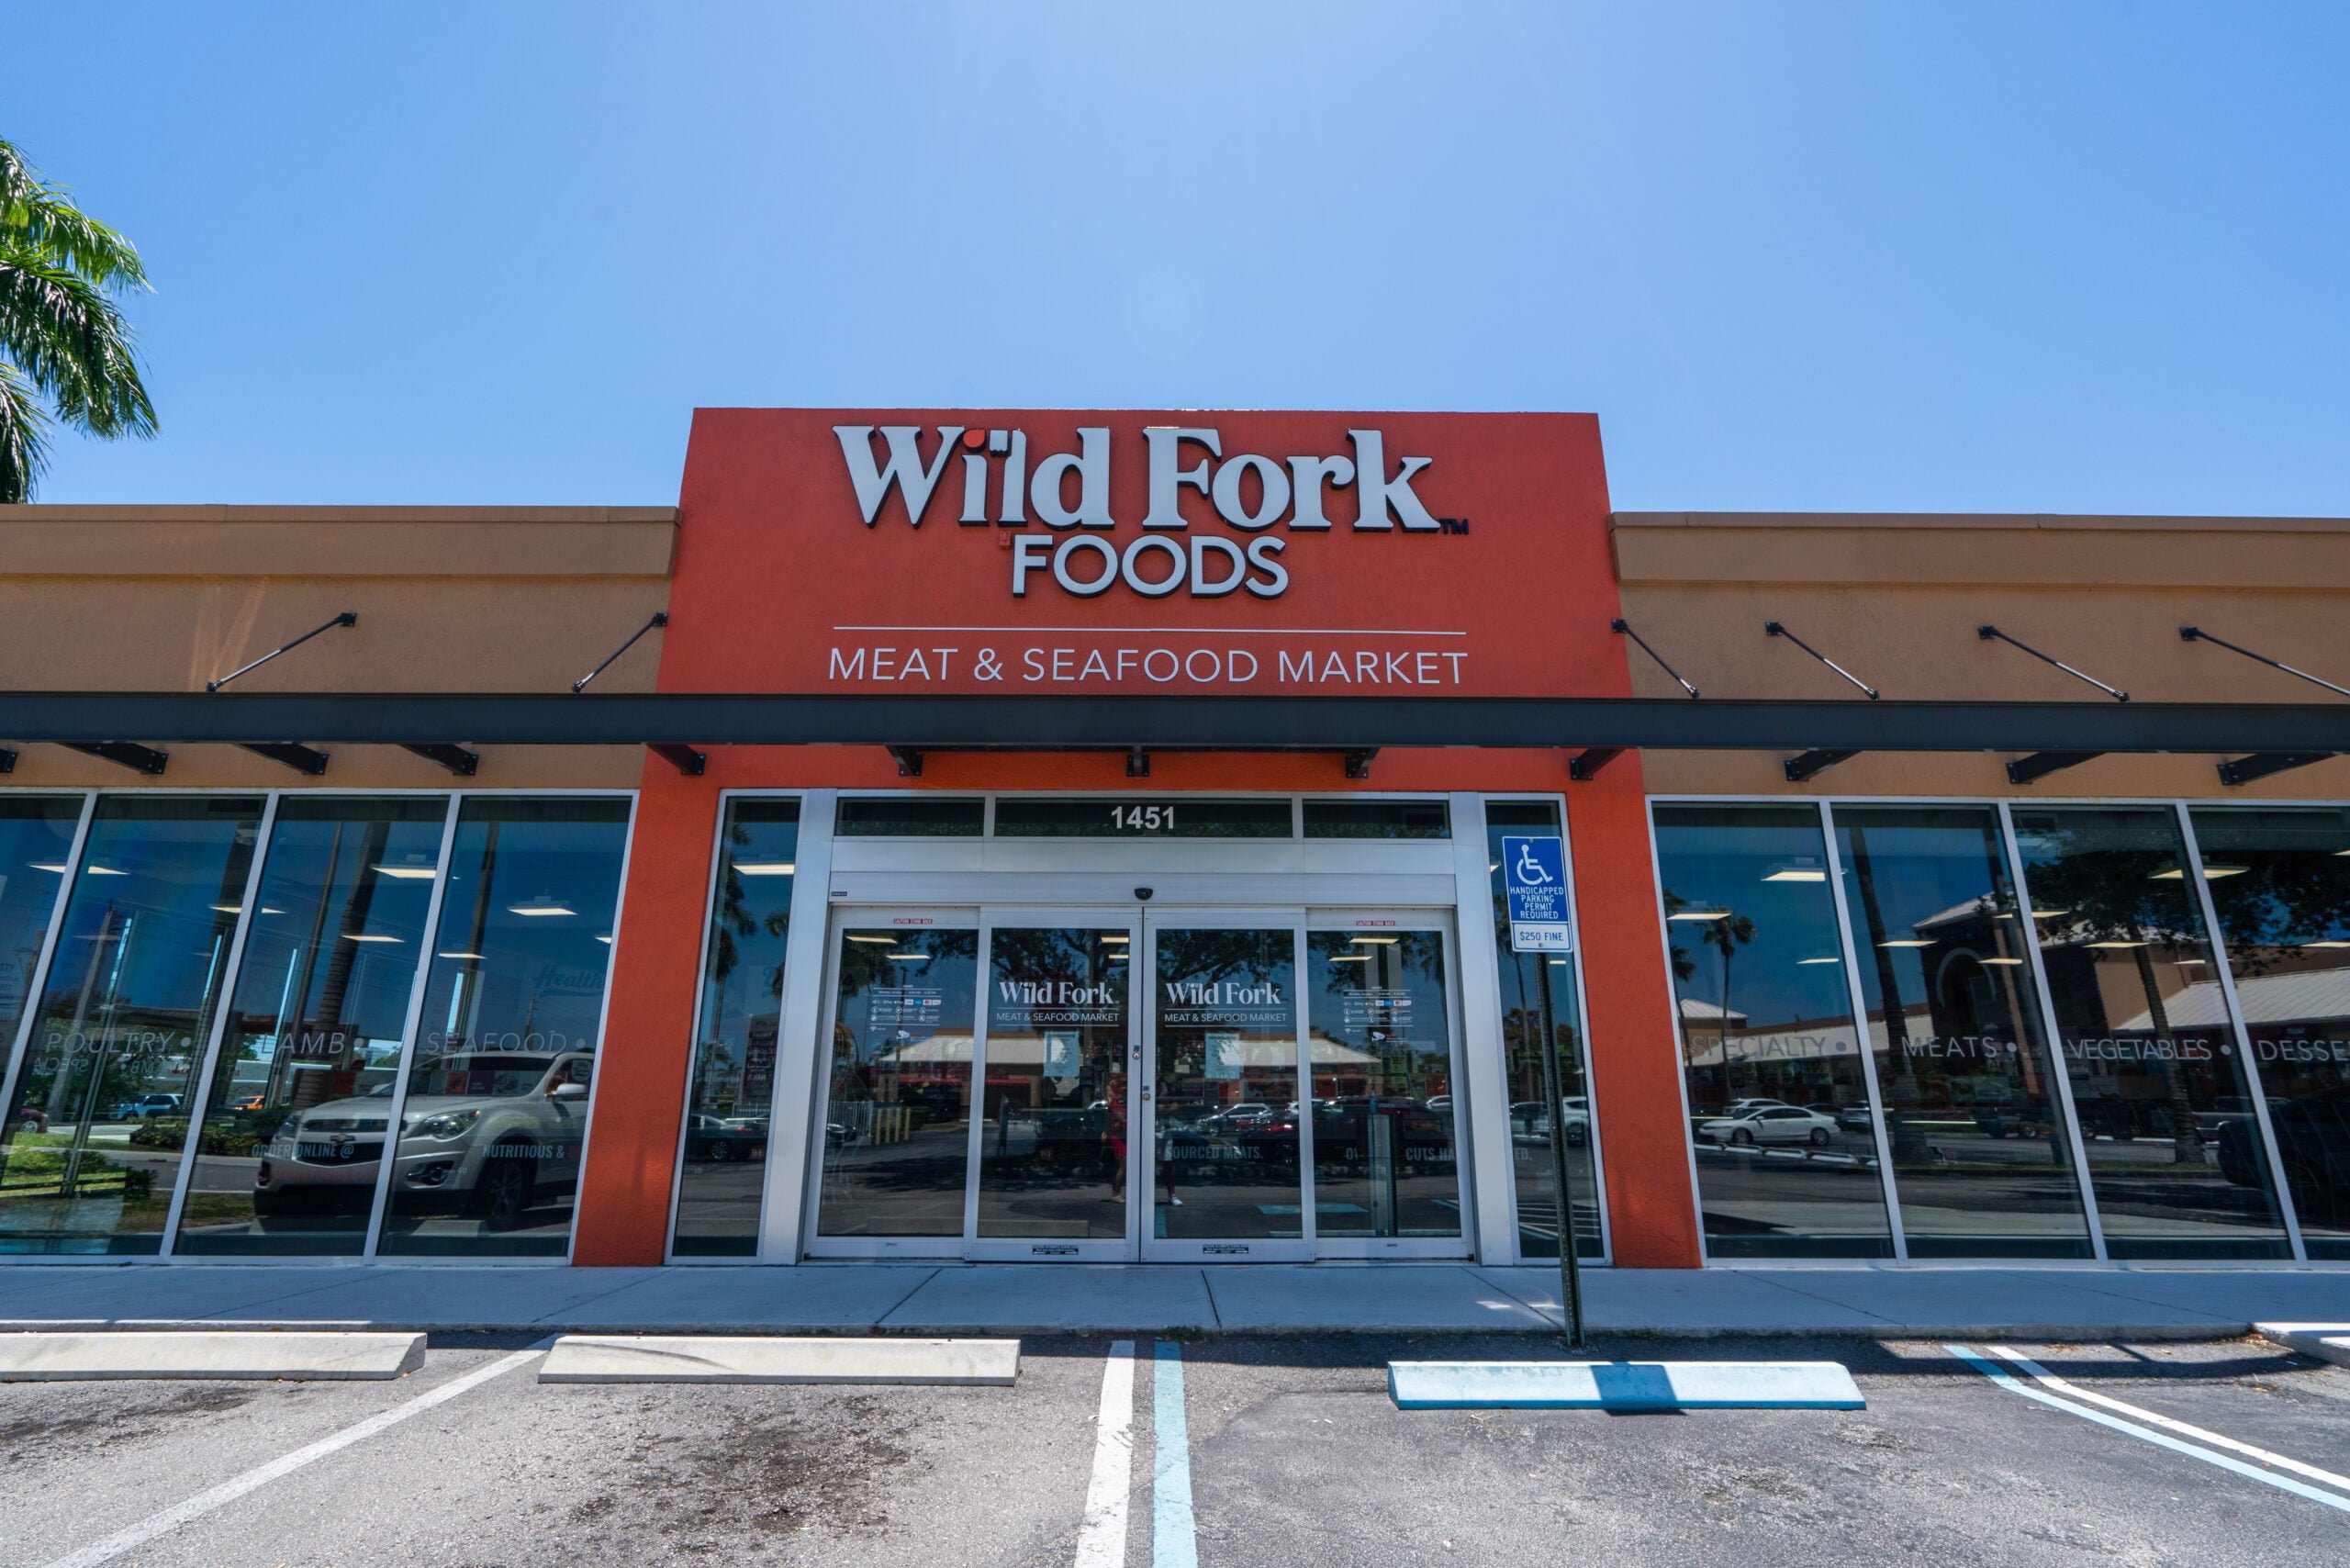 Wild forks locations